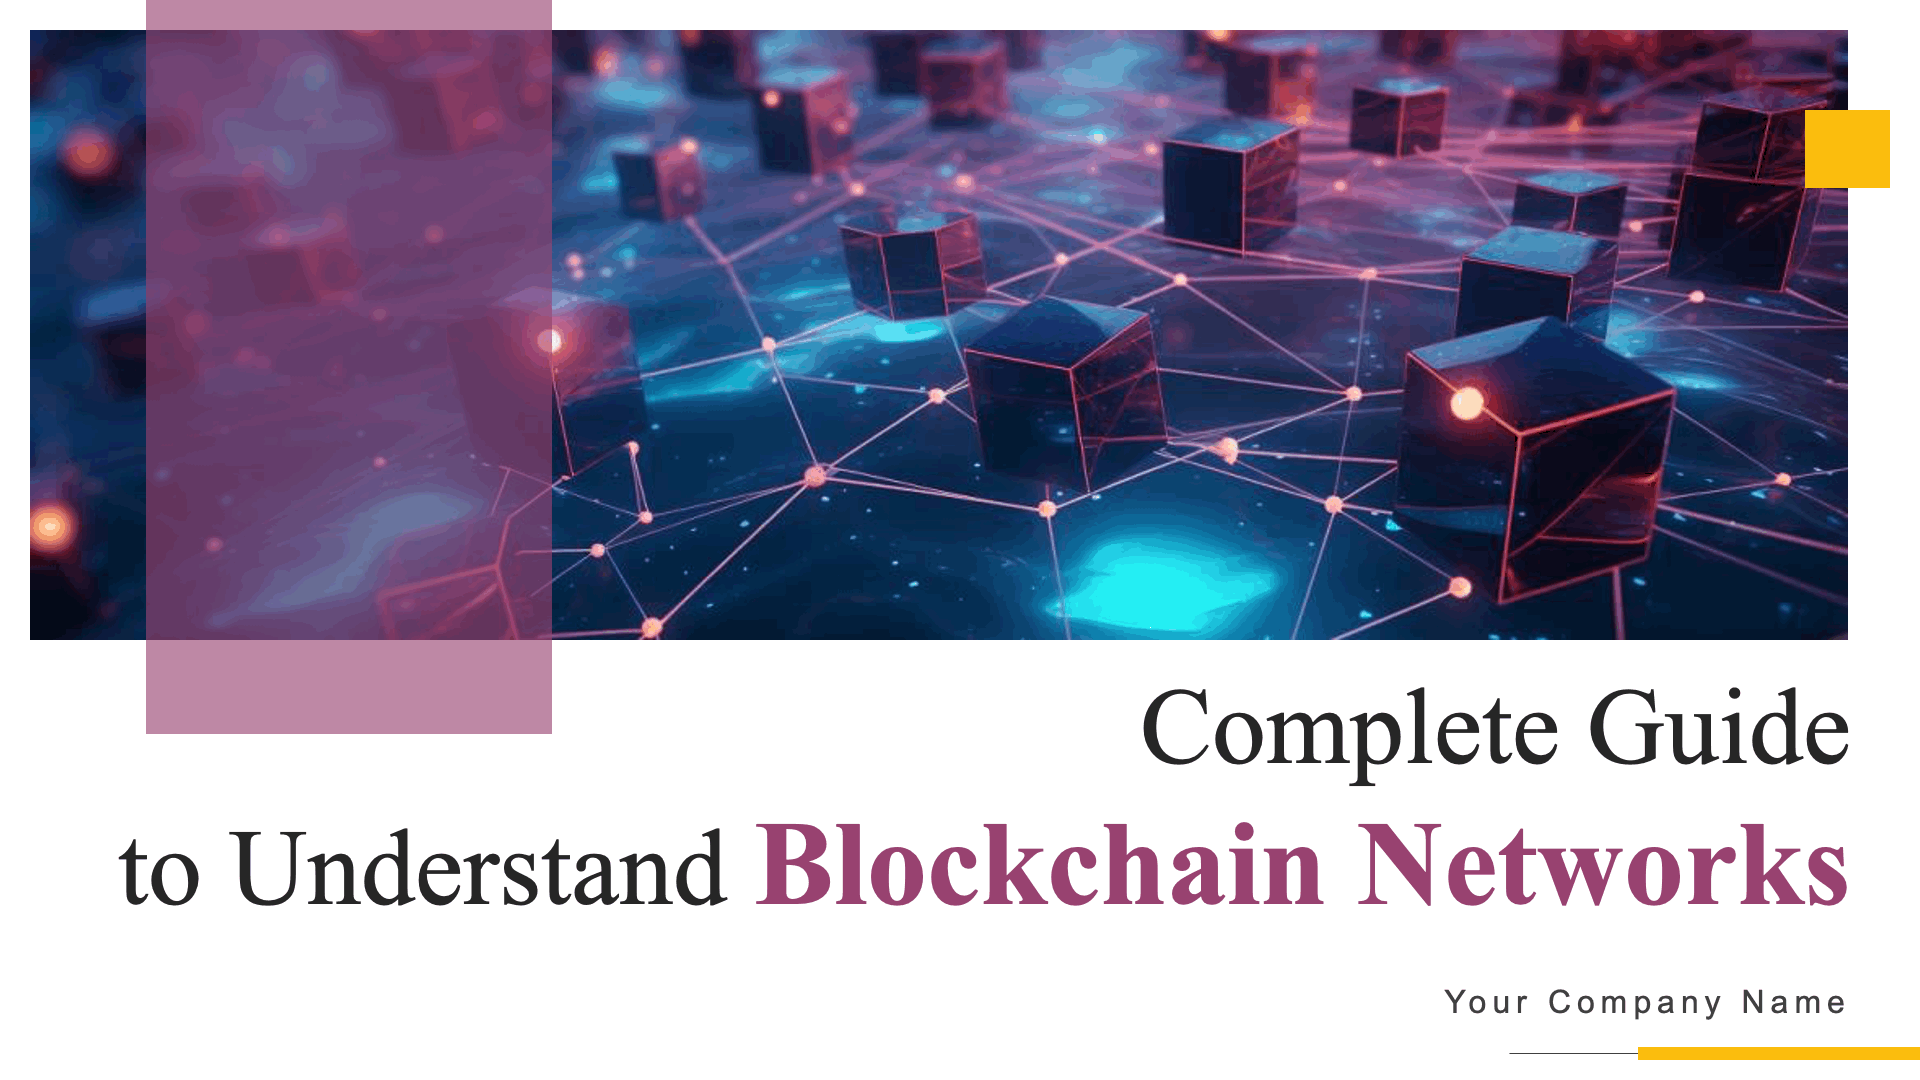 A Complete Guide to Understanding Blockchain Networks